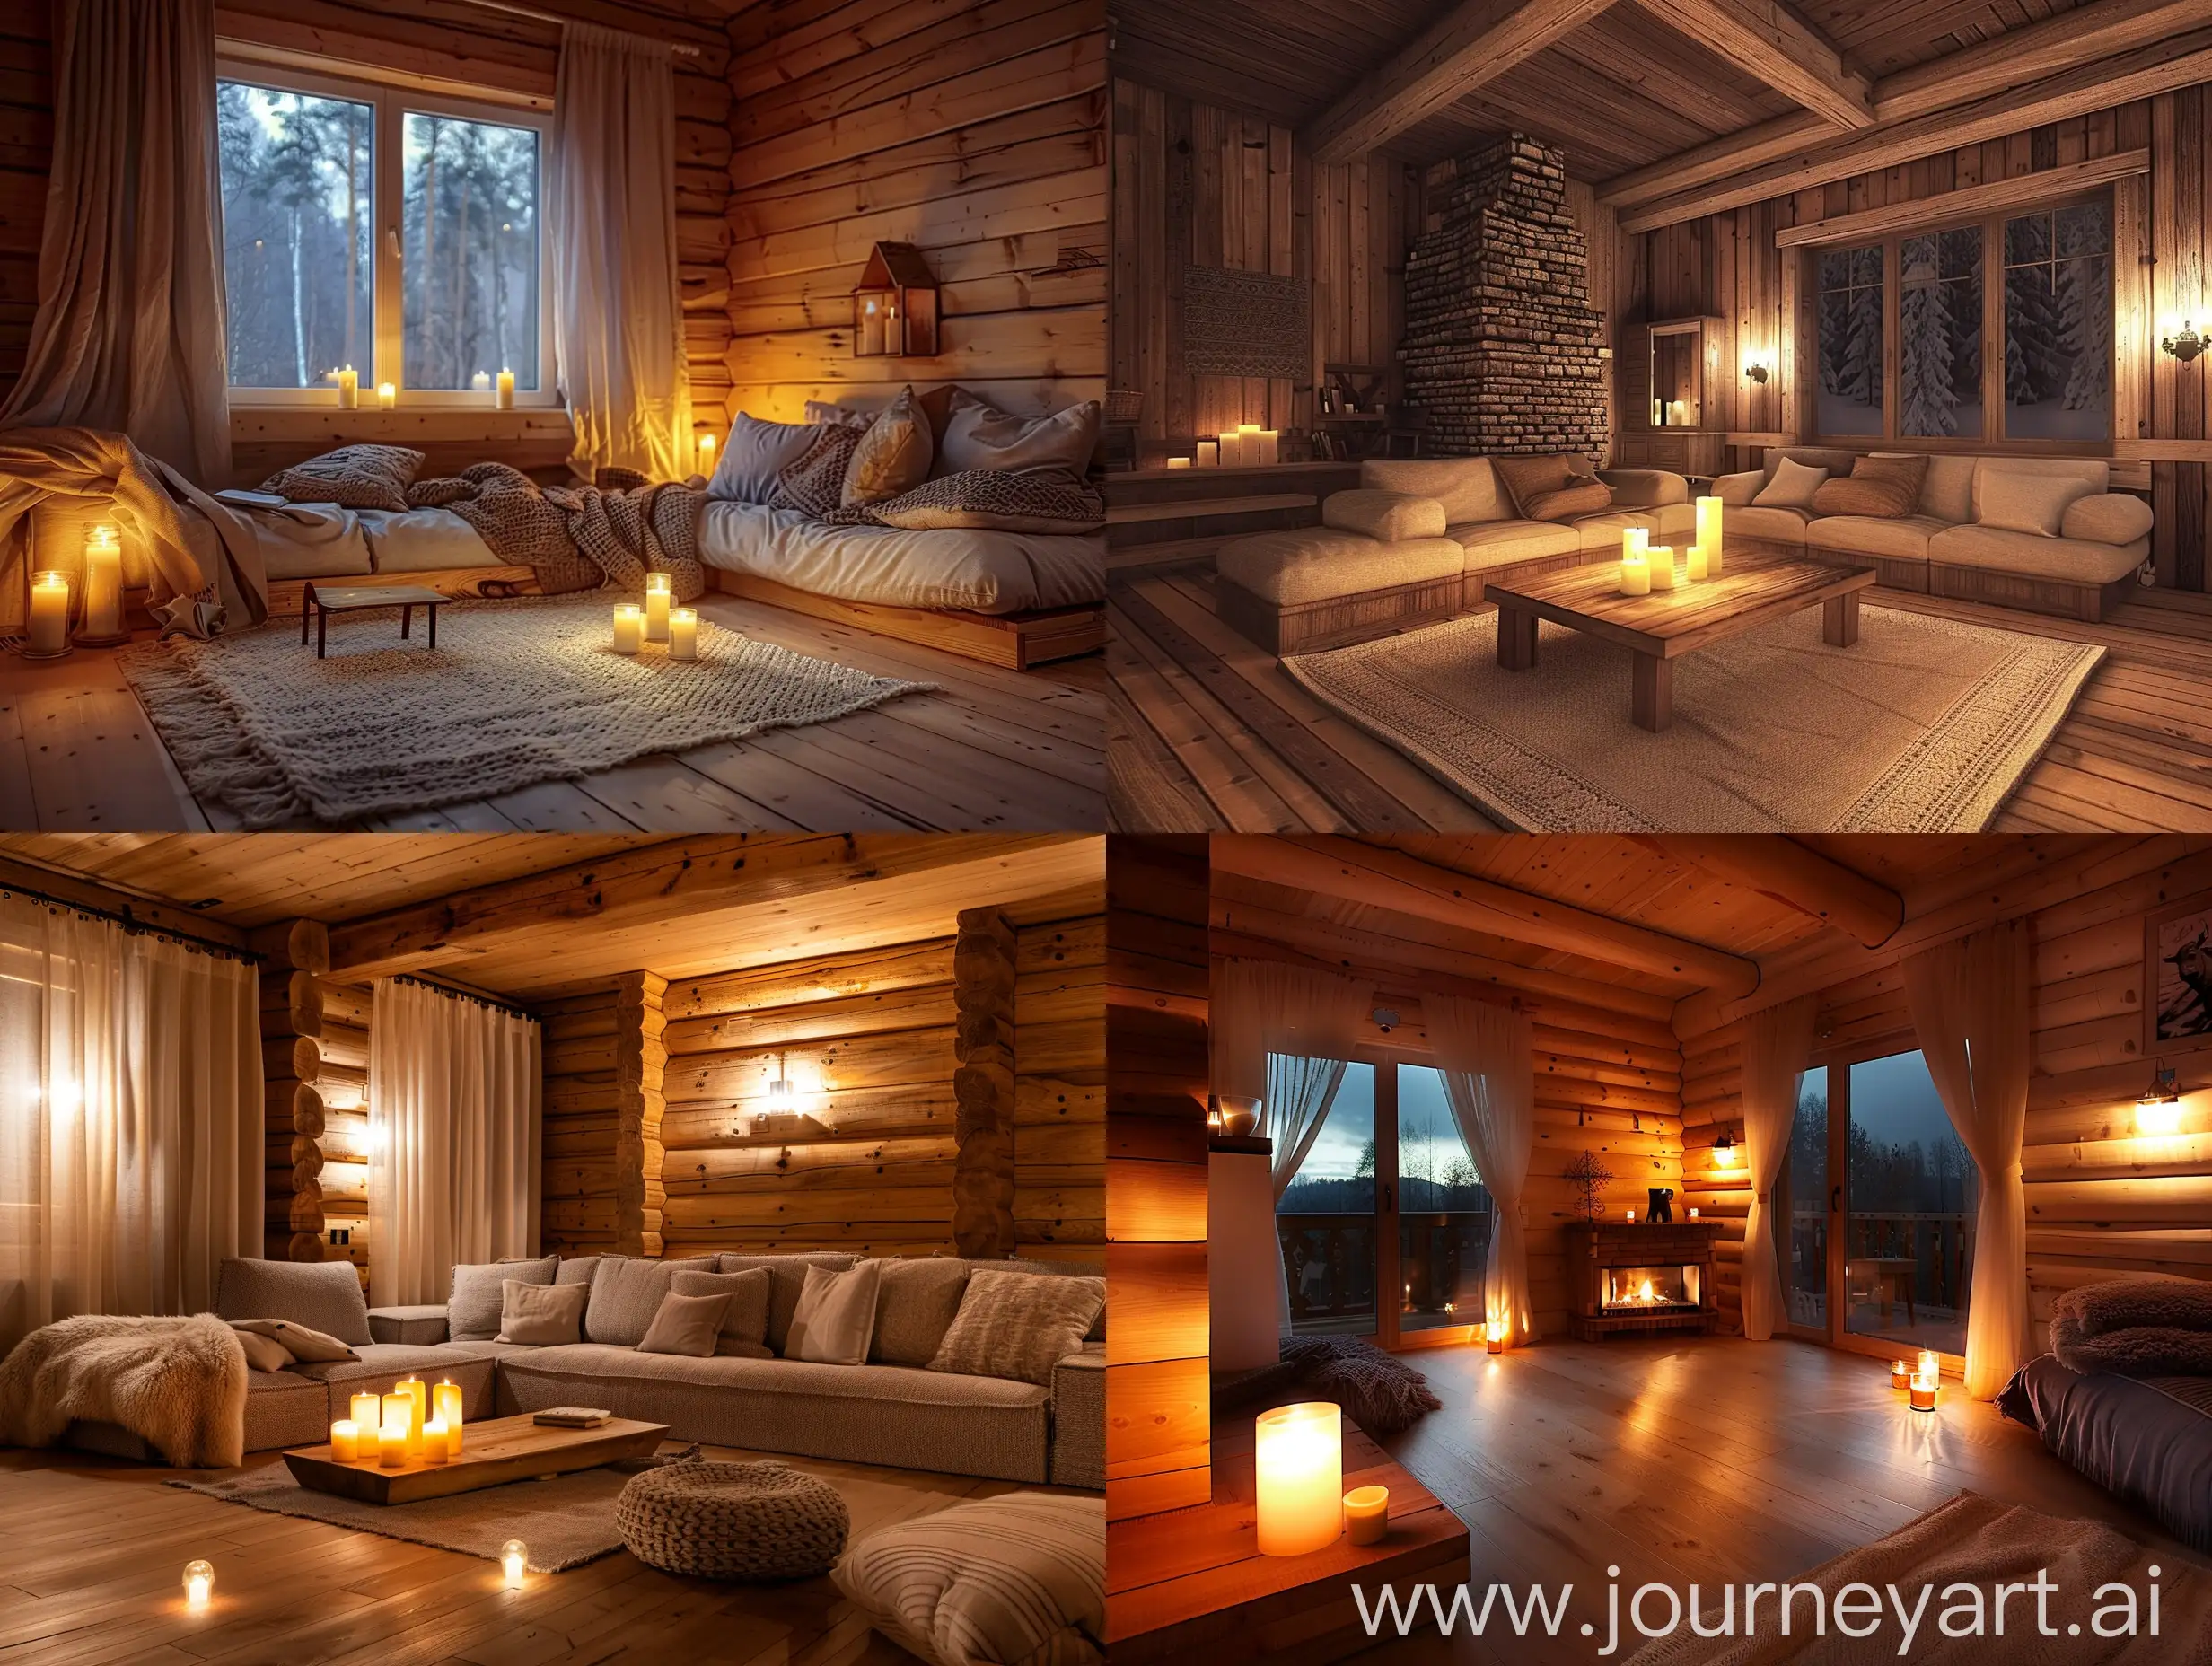 living room, interior in wooden style. The room is very cozy and pleasant. The room is lightly lit by candles